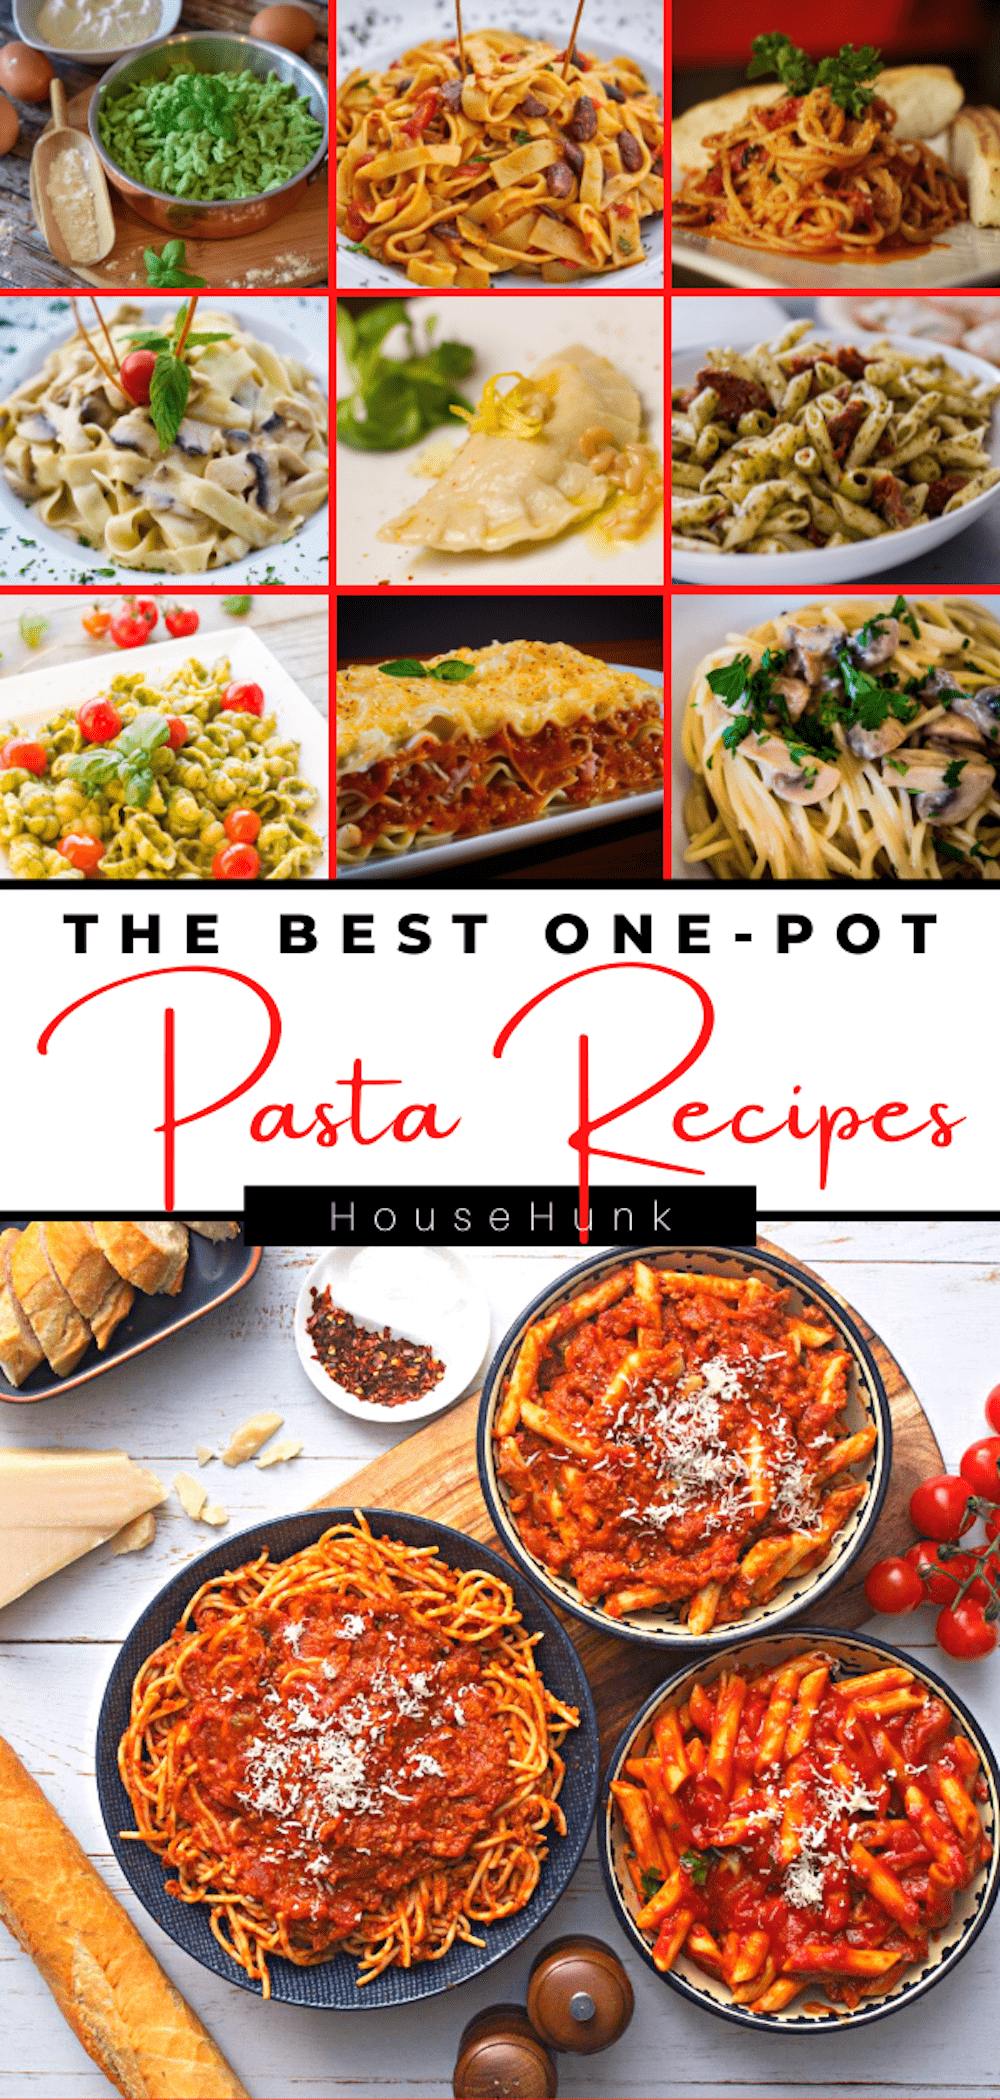 13 Easy One-Pot Pasta Recipes to Try Tonight - House Hunk